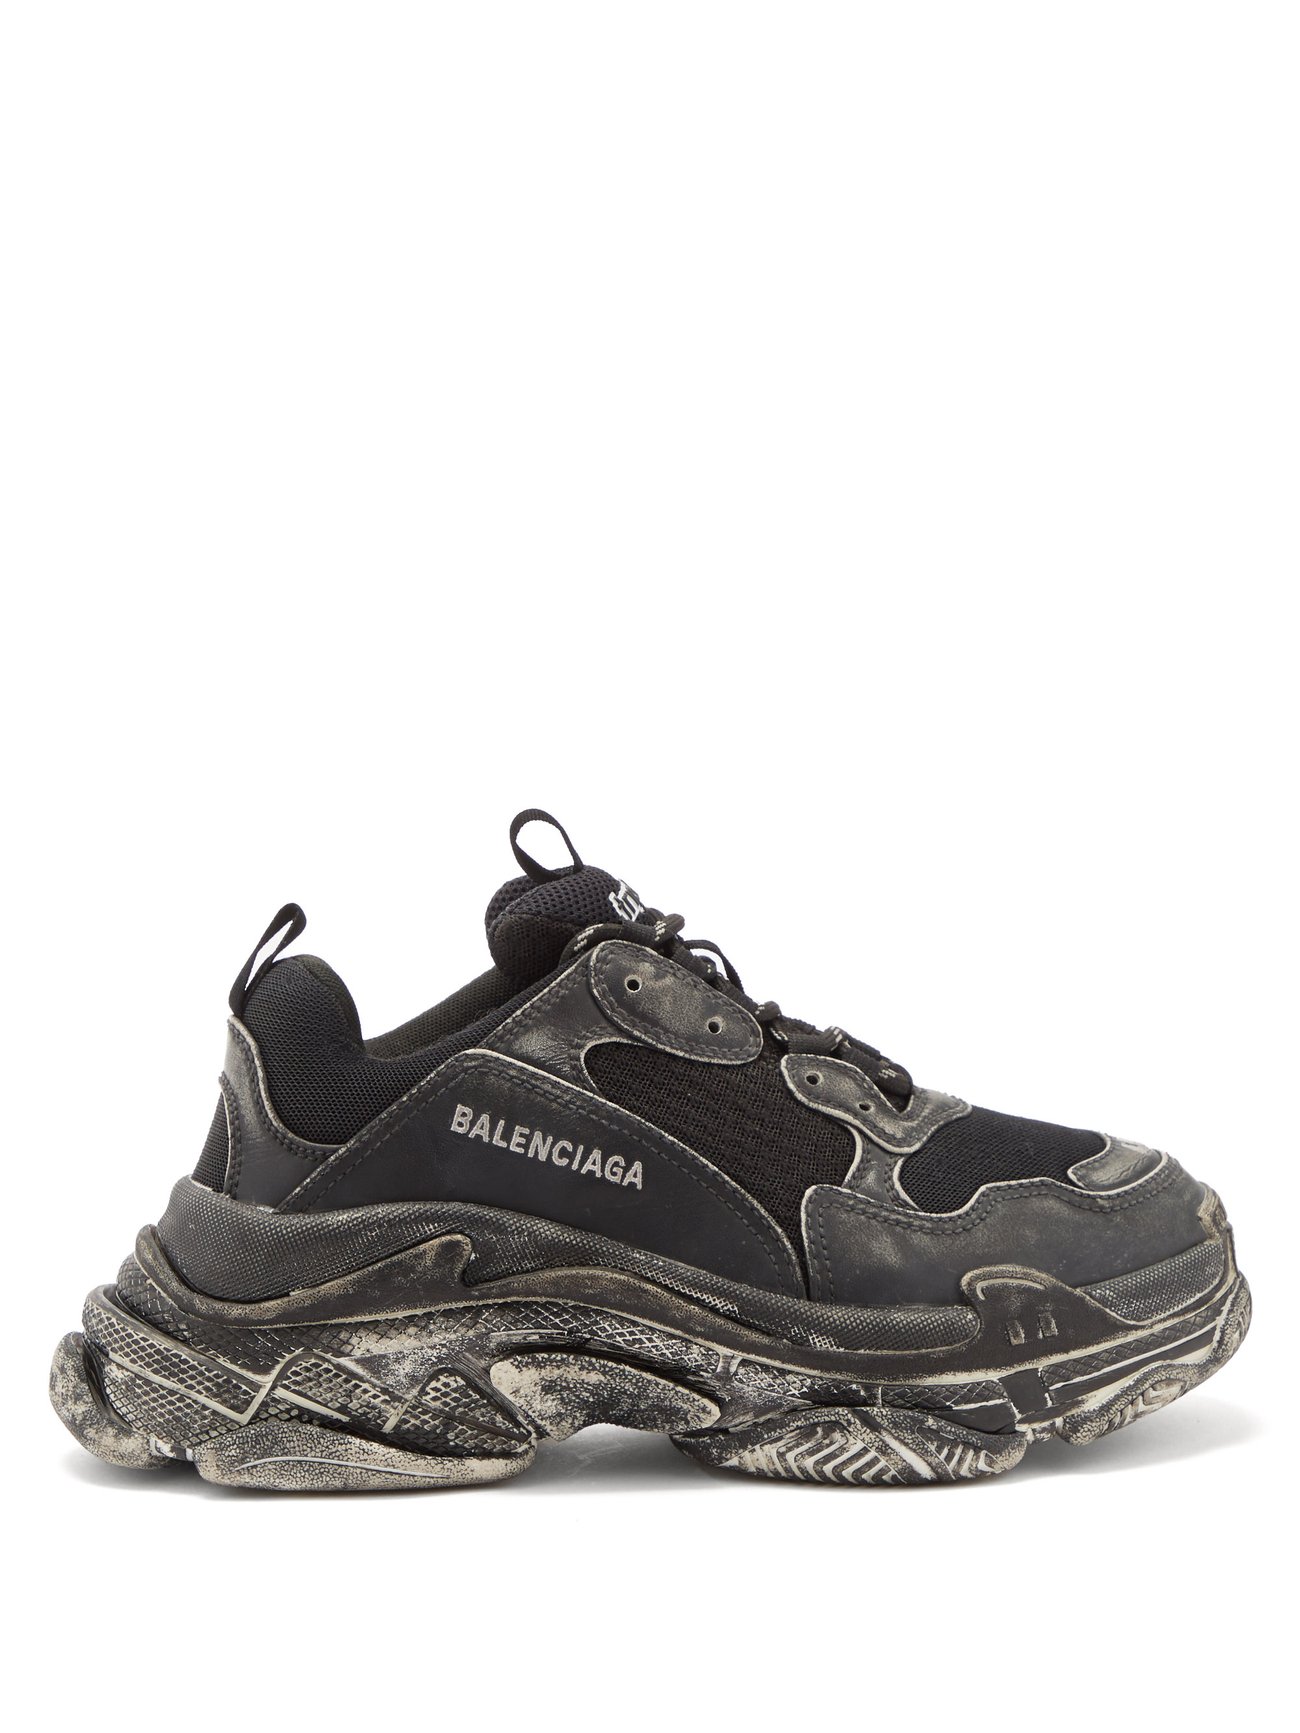 Black Triple S faux-leather and trainers | Balenciaga |